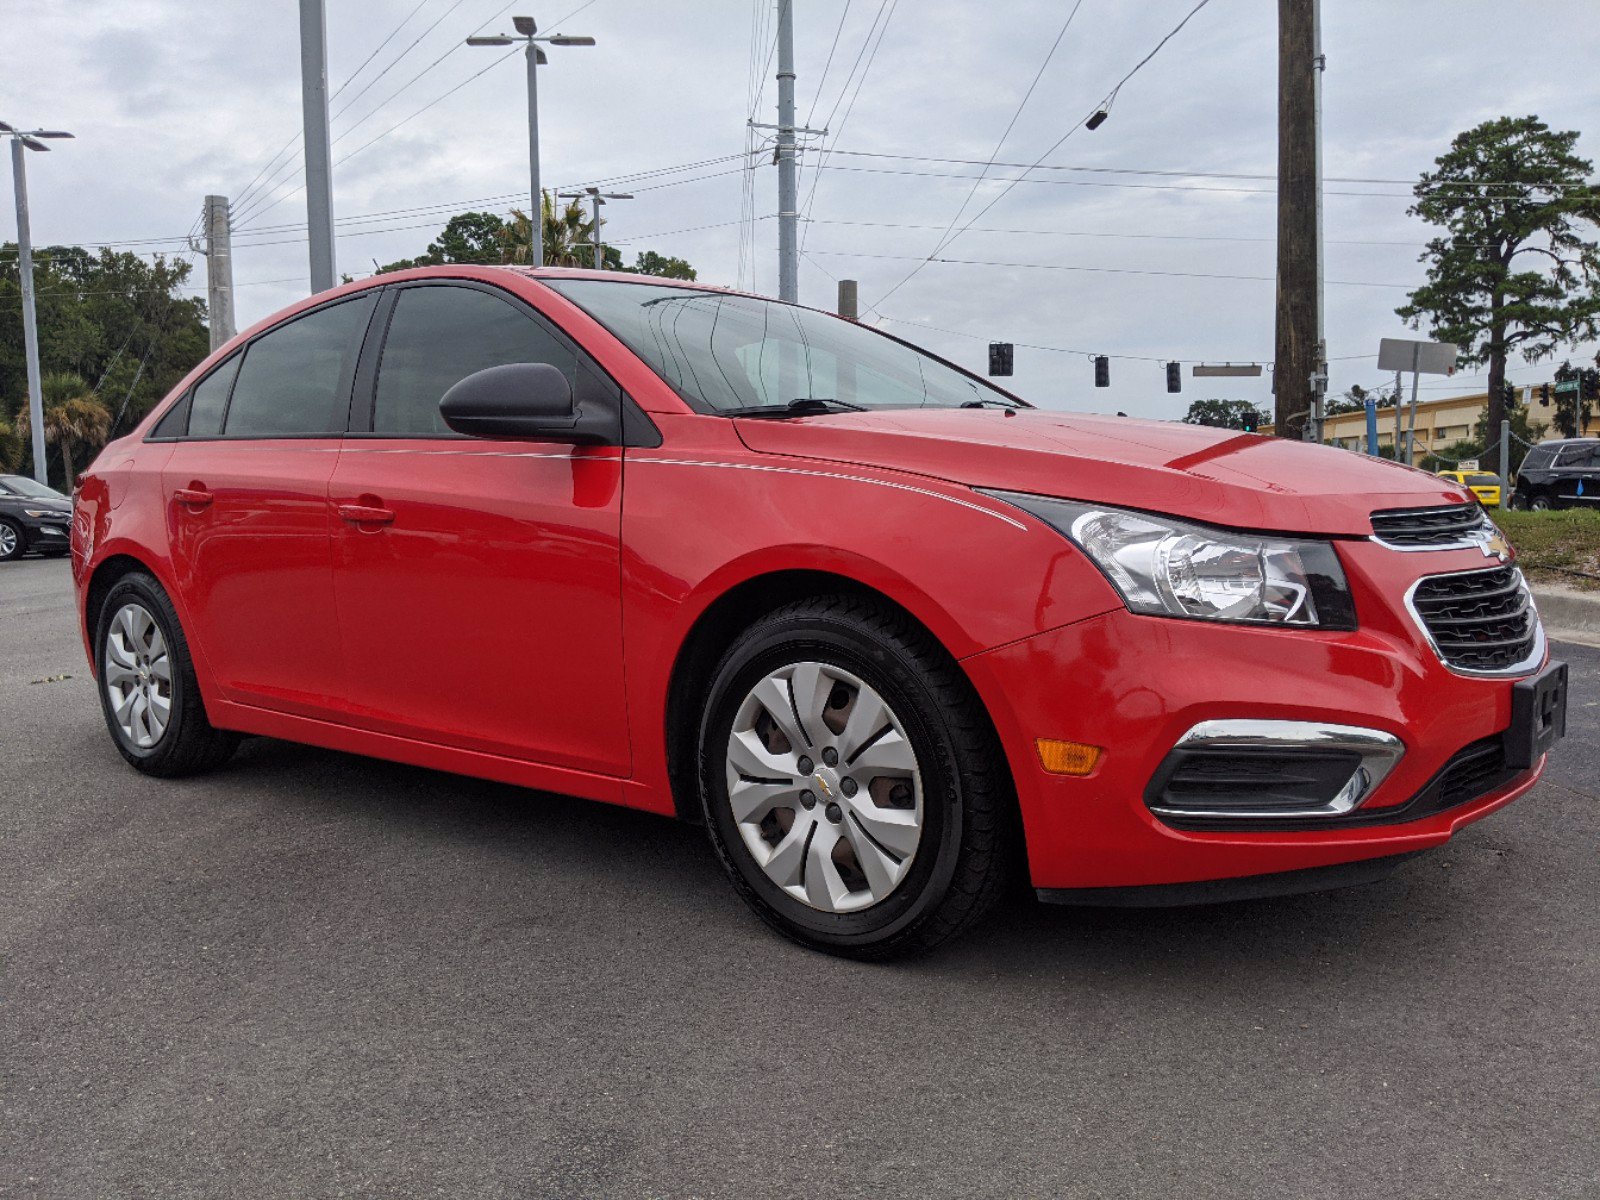 Pre-Owned 2016 Chevrolet Cruze Limited LS 4dr Car in Fort Walton Beach ...